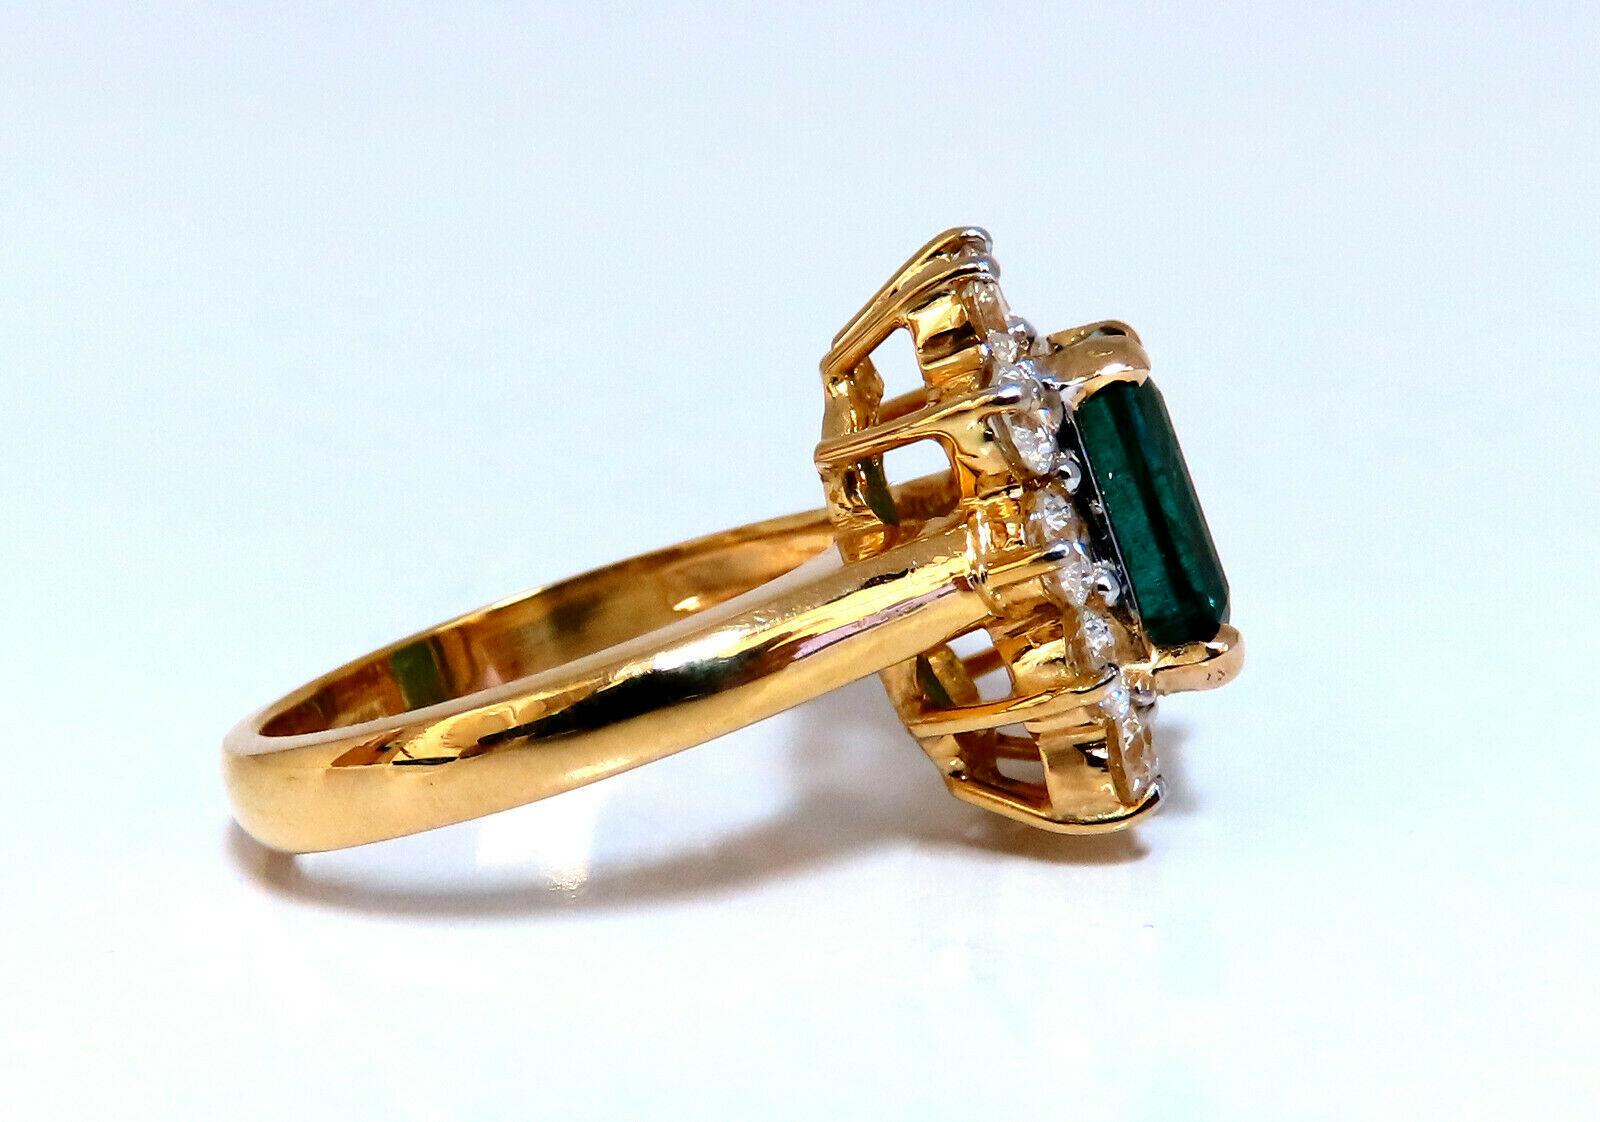 Halo Green.

3.72ct. Natural Emerald Ring

GIA Certified: #1359603248(To Accompany)

9.97 X 8.10 x 5.50mm

Full cut Emerald Cut brilliant Clean Clarity & Transparent

(F2) Vivid Green / Zambia Best

1.80ct. Diamonds.

Round & full cuts

G-color Vs-2